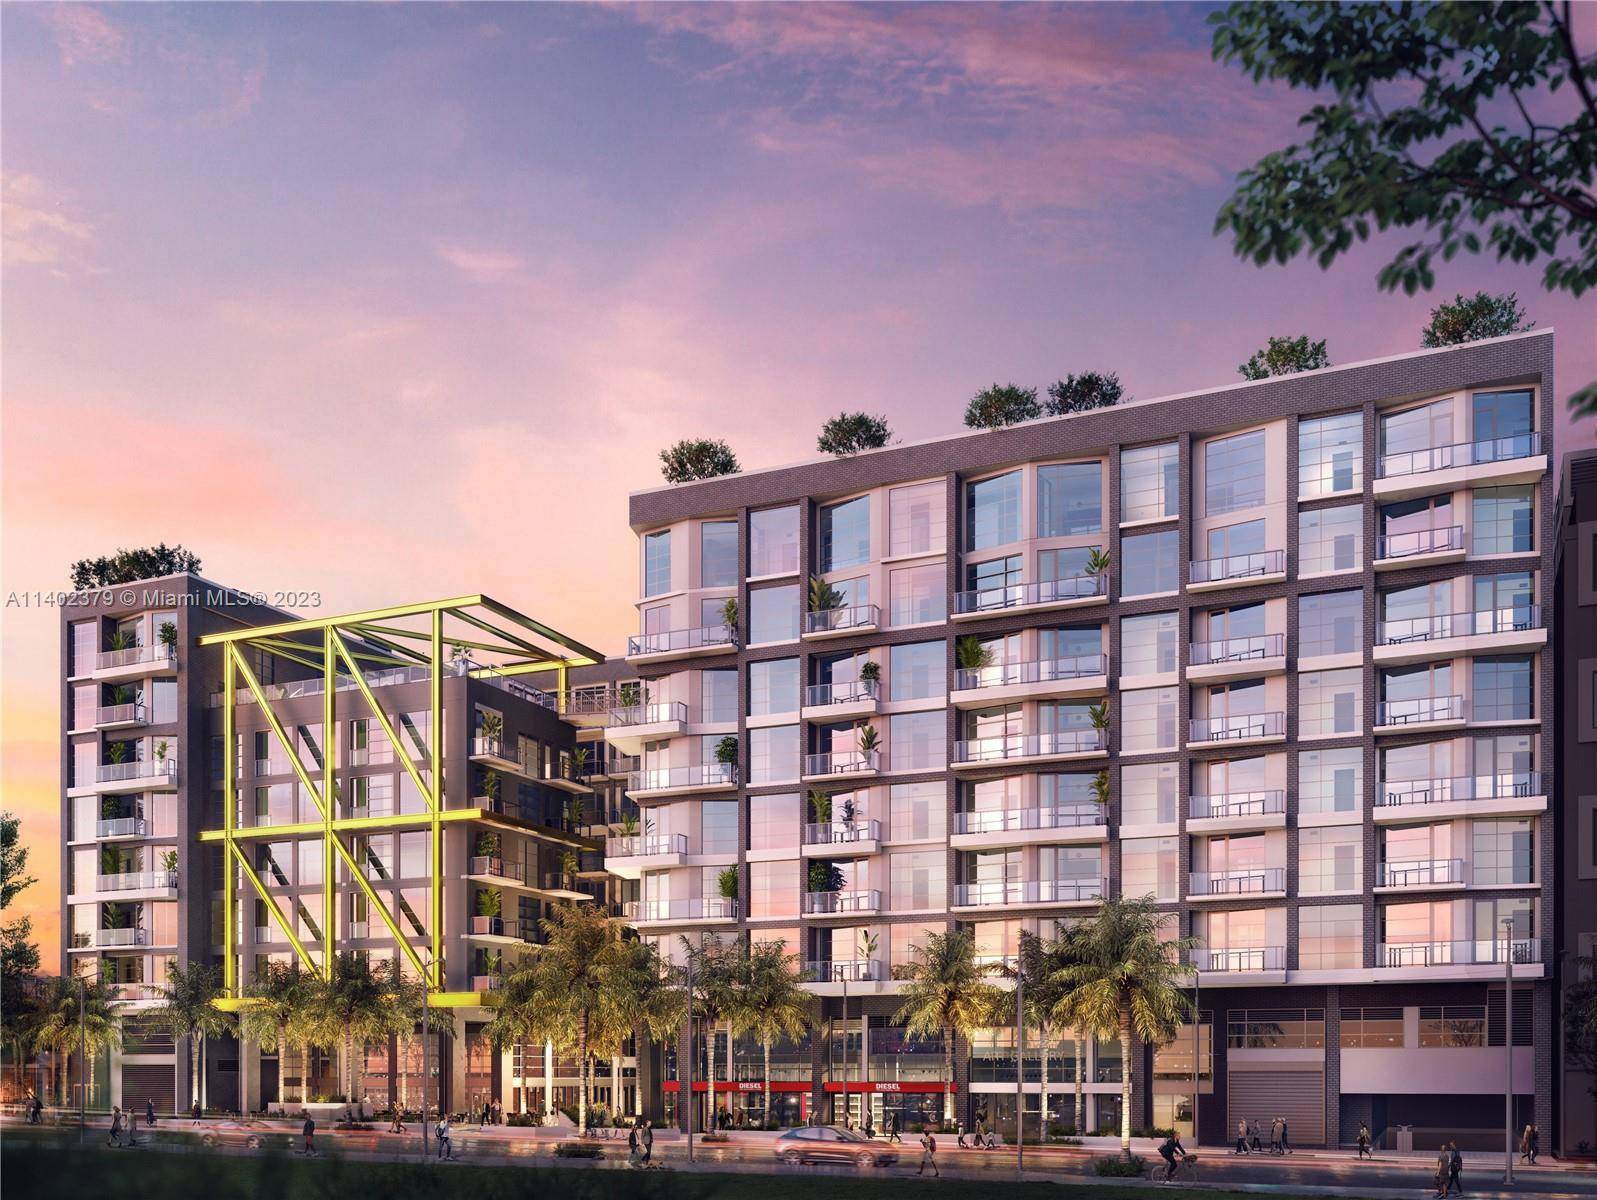 Welcome to Diesel Wynwood The First Diesel Branded Residences in The World, Located in Miami s Art Centric Wynwood District This iconic residential building delivers an authentic, eco conscious way ...